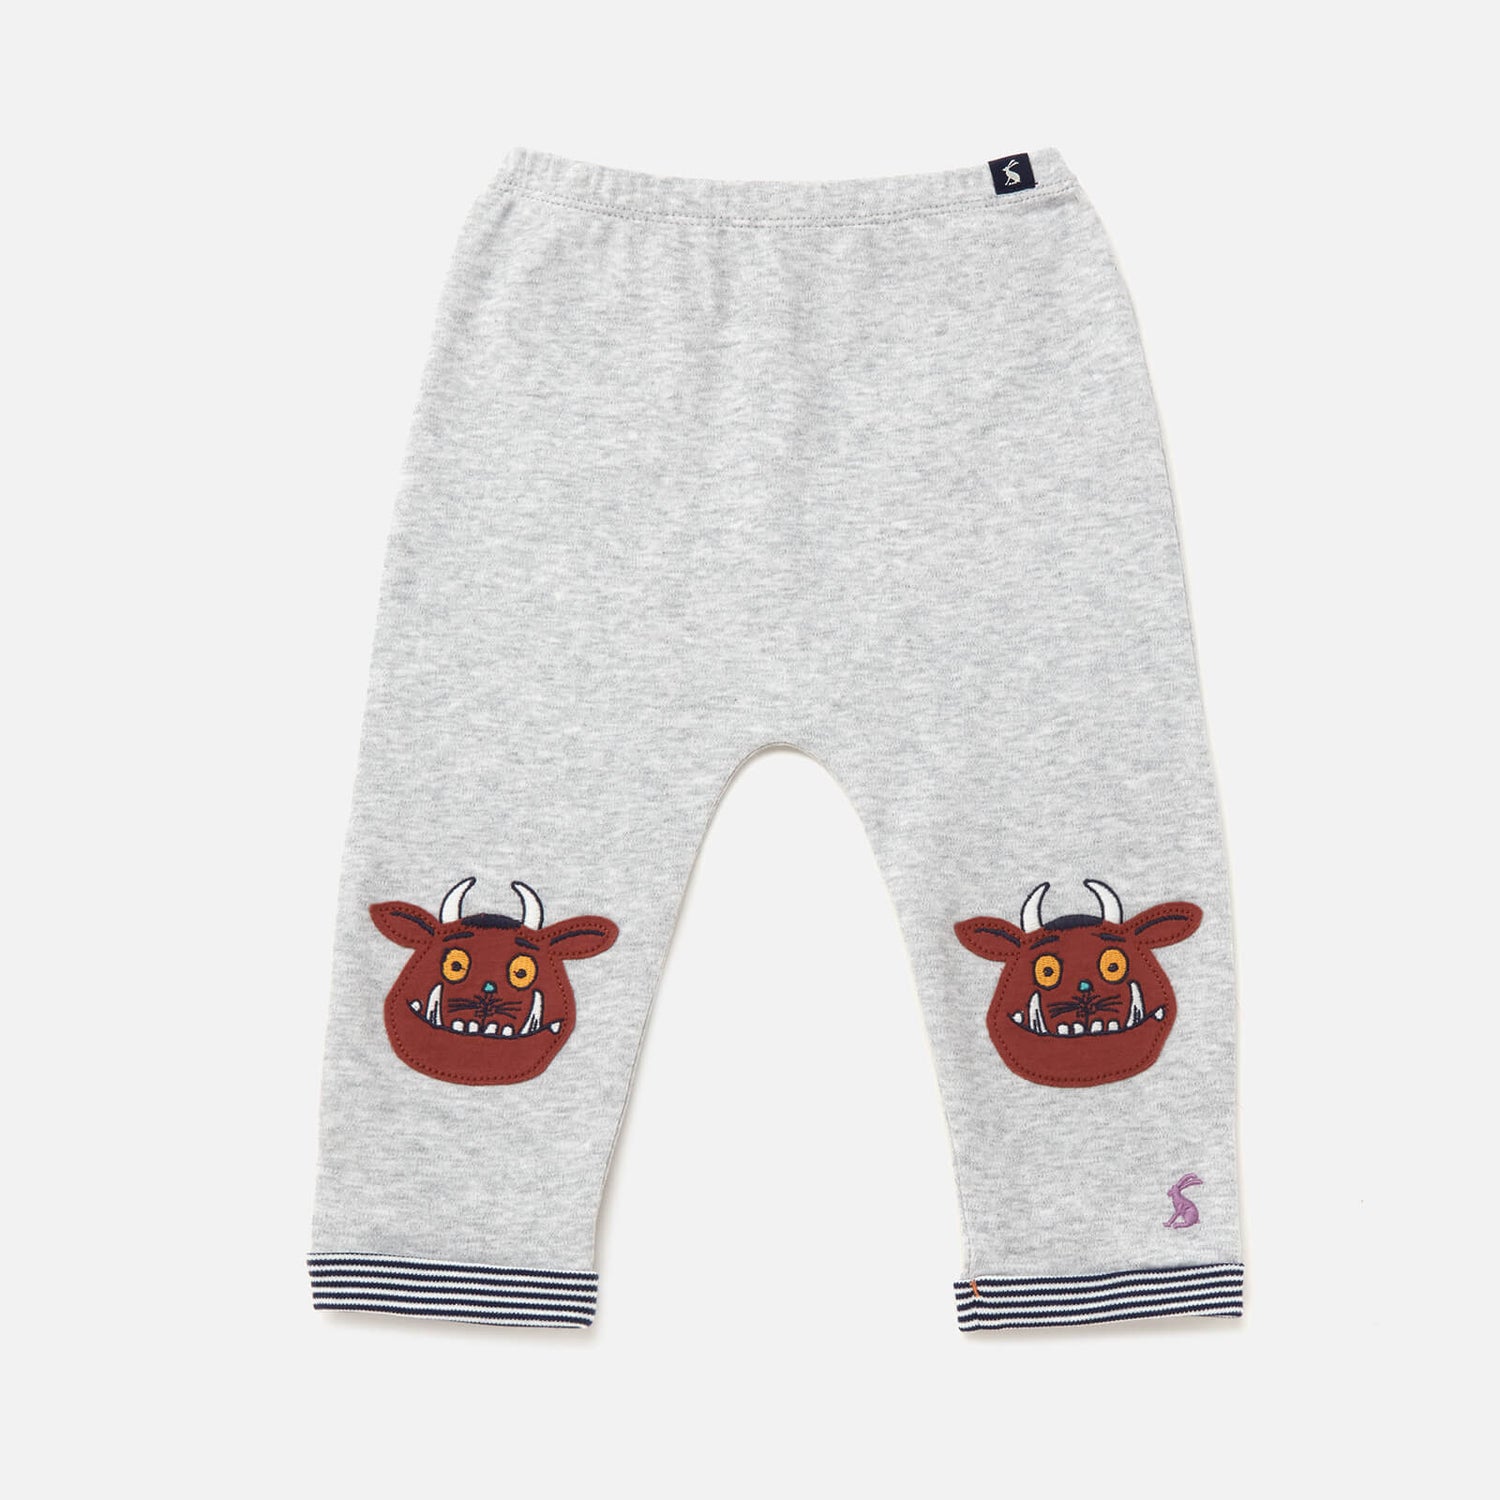 Joules Babys' Gruffalo Joggers - Grey - 6-9 months